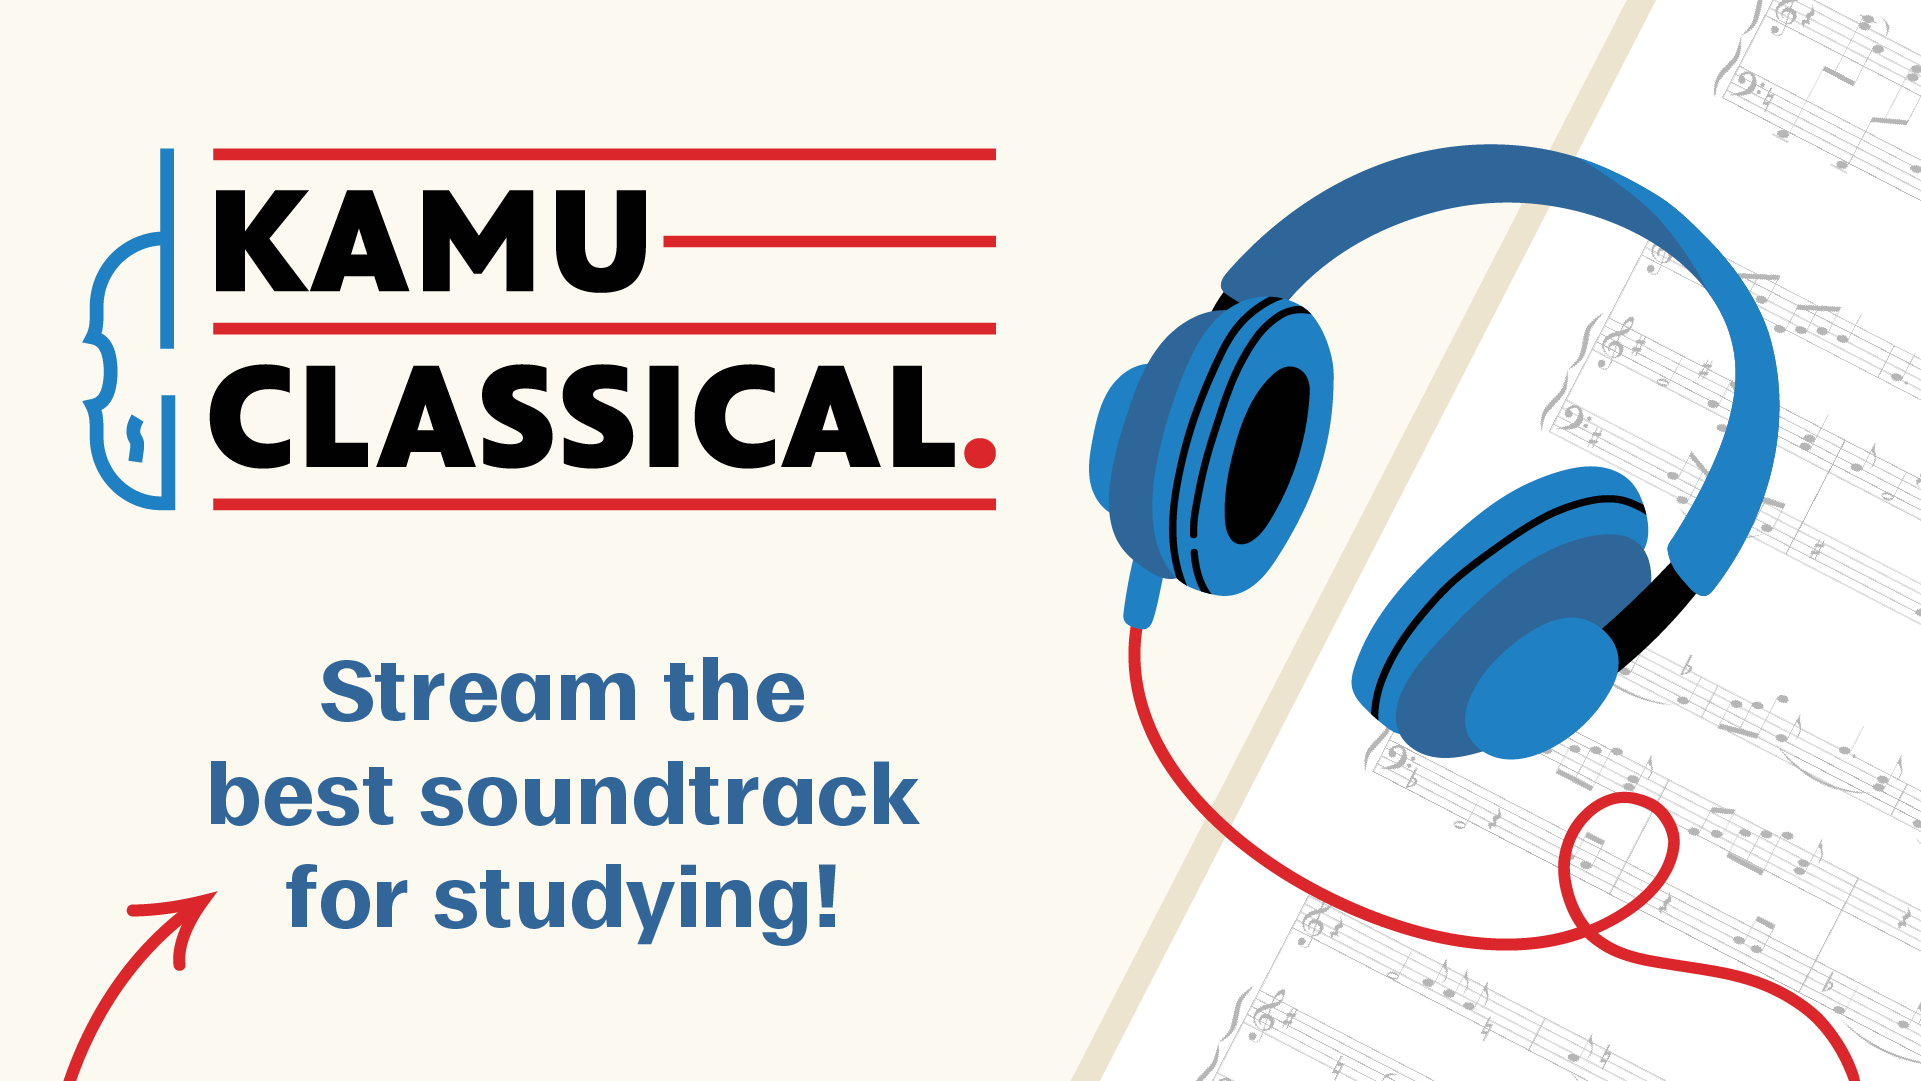 KAMU-Classical. Stream the best soundtrack for studying.